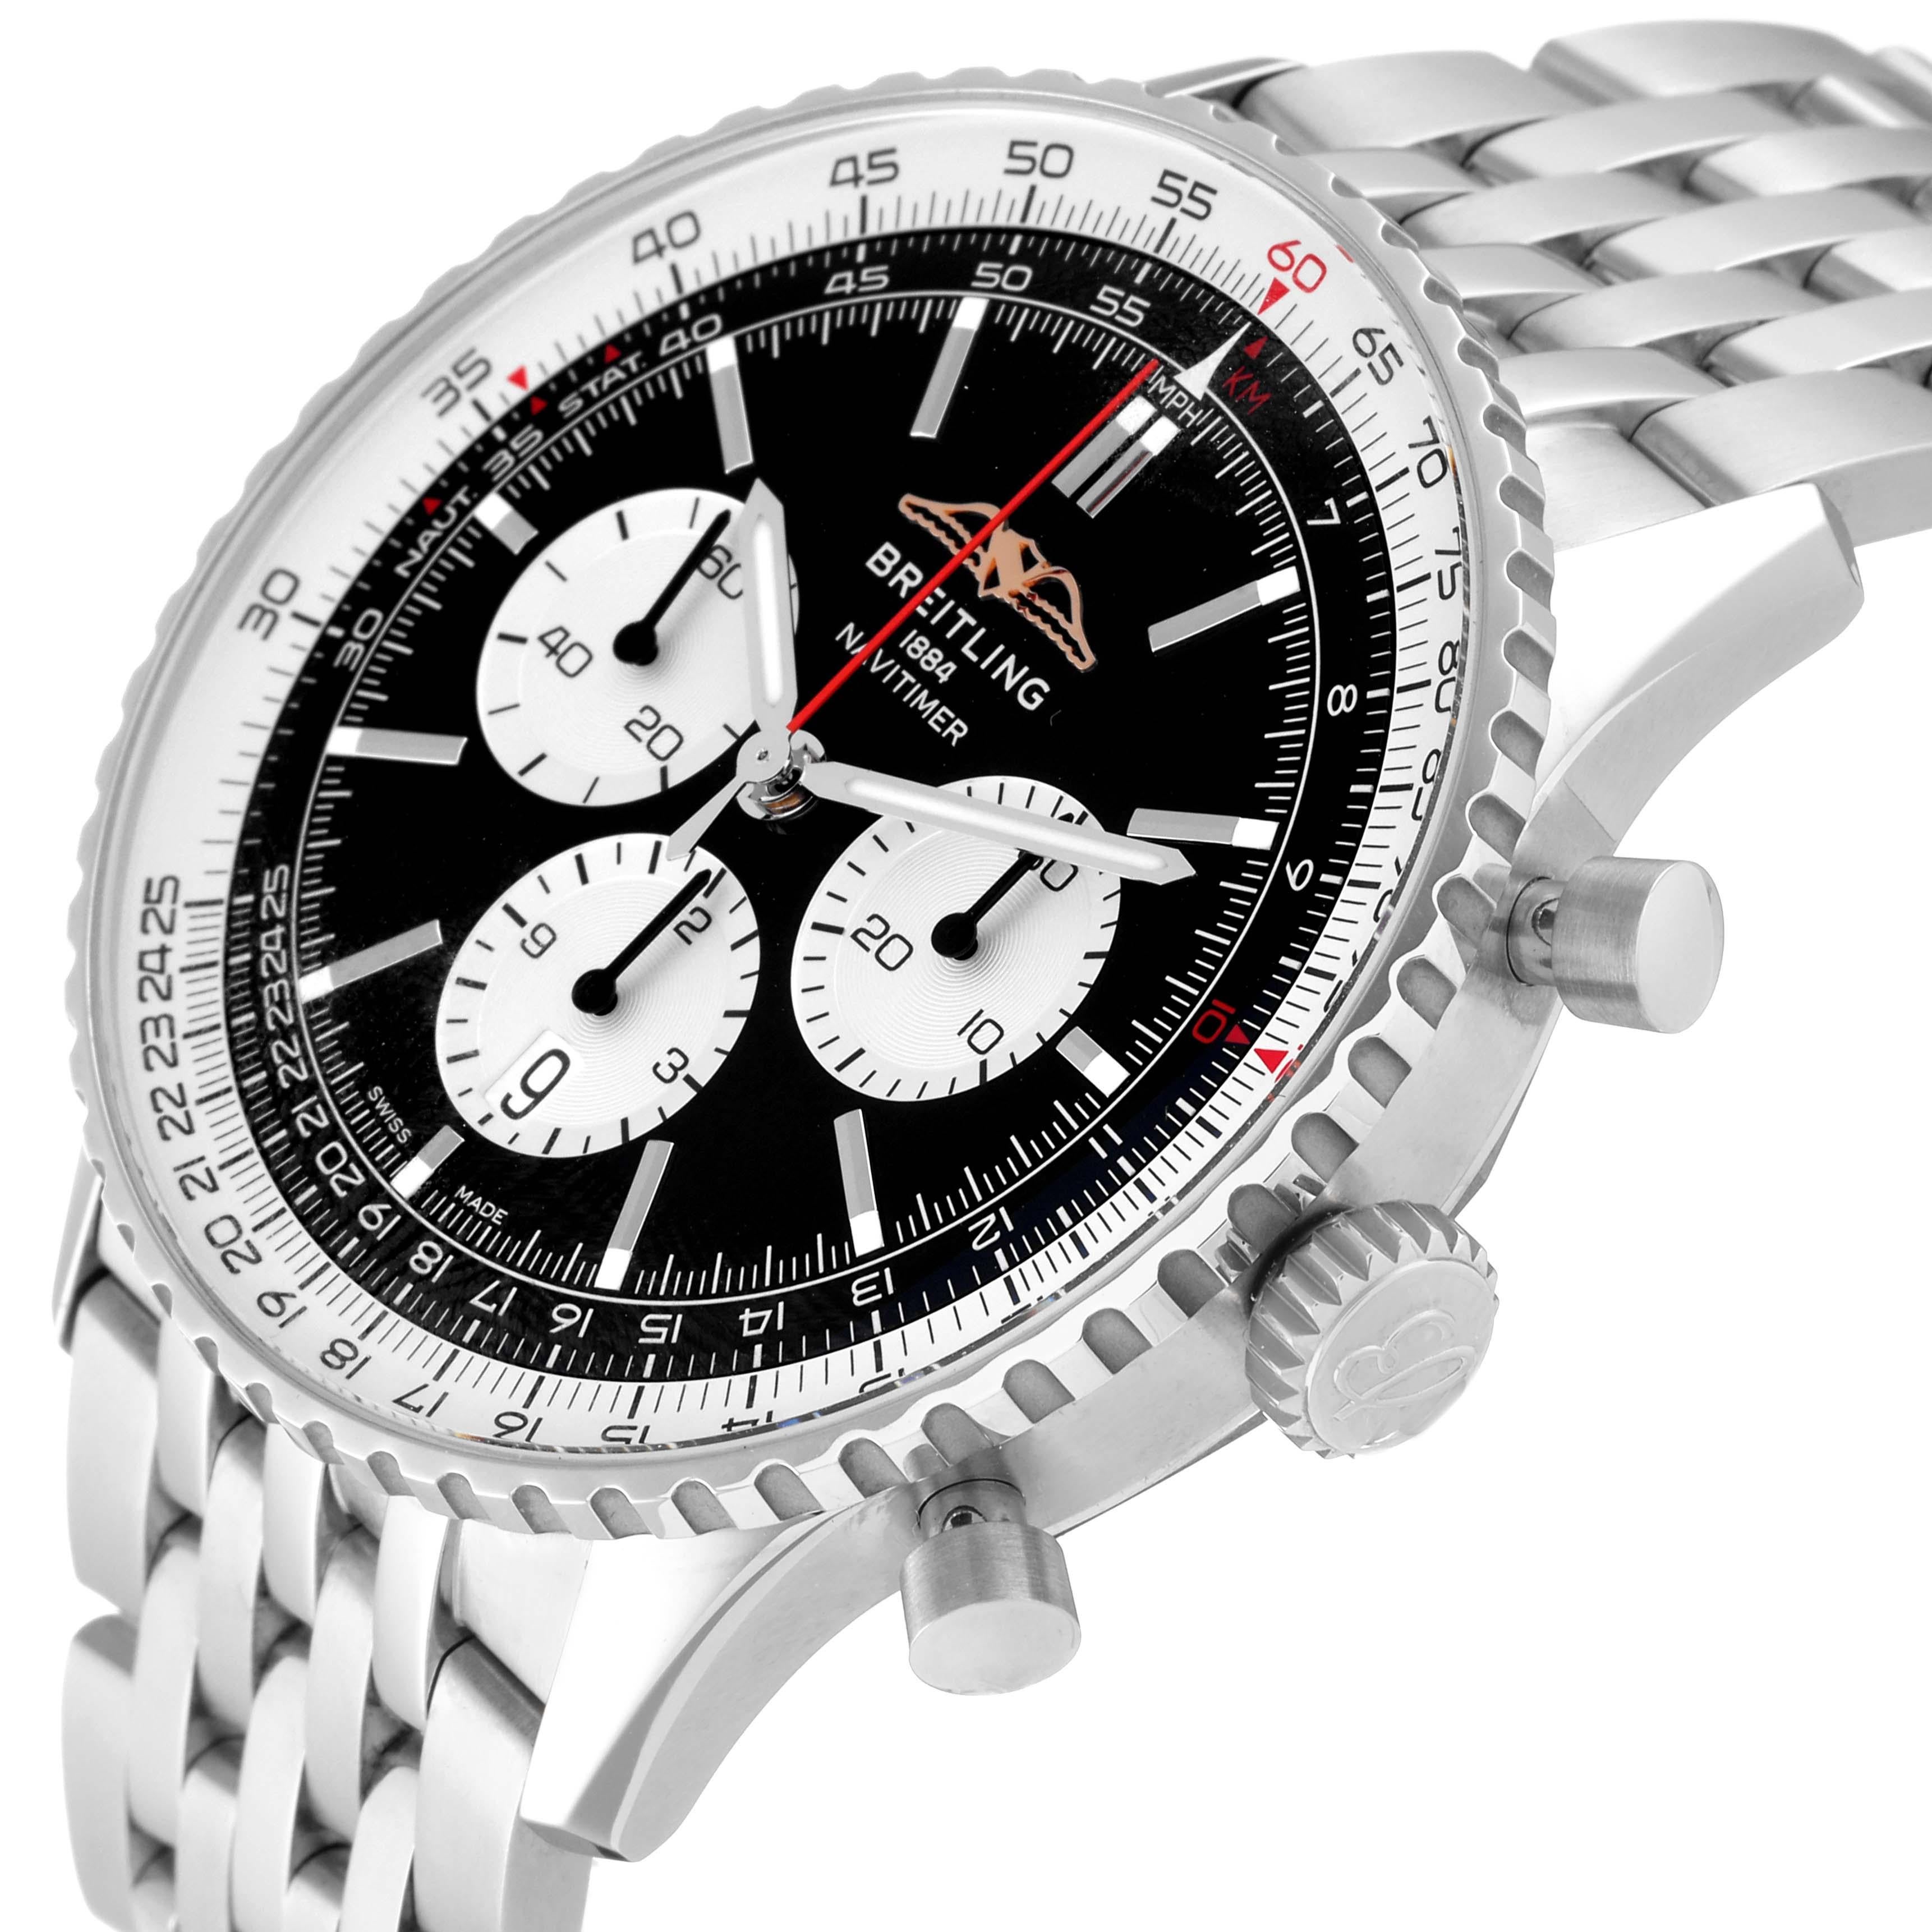 Breitling Navitimer 01 Black Dial Steel Mens Watch AB0137 Box Card In Excellent Condition For Sale In Atlanta, GA